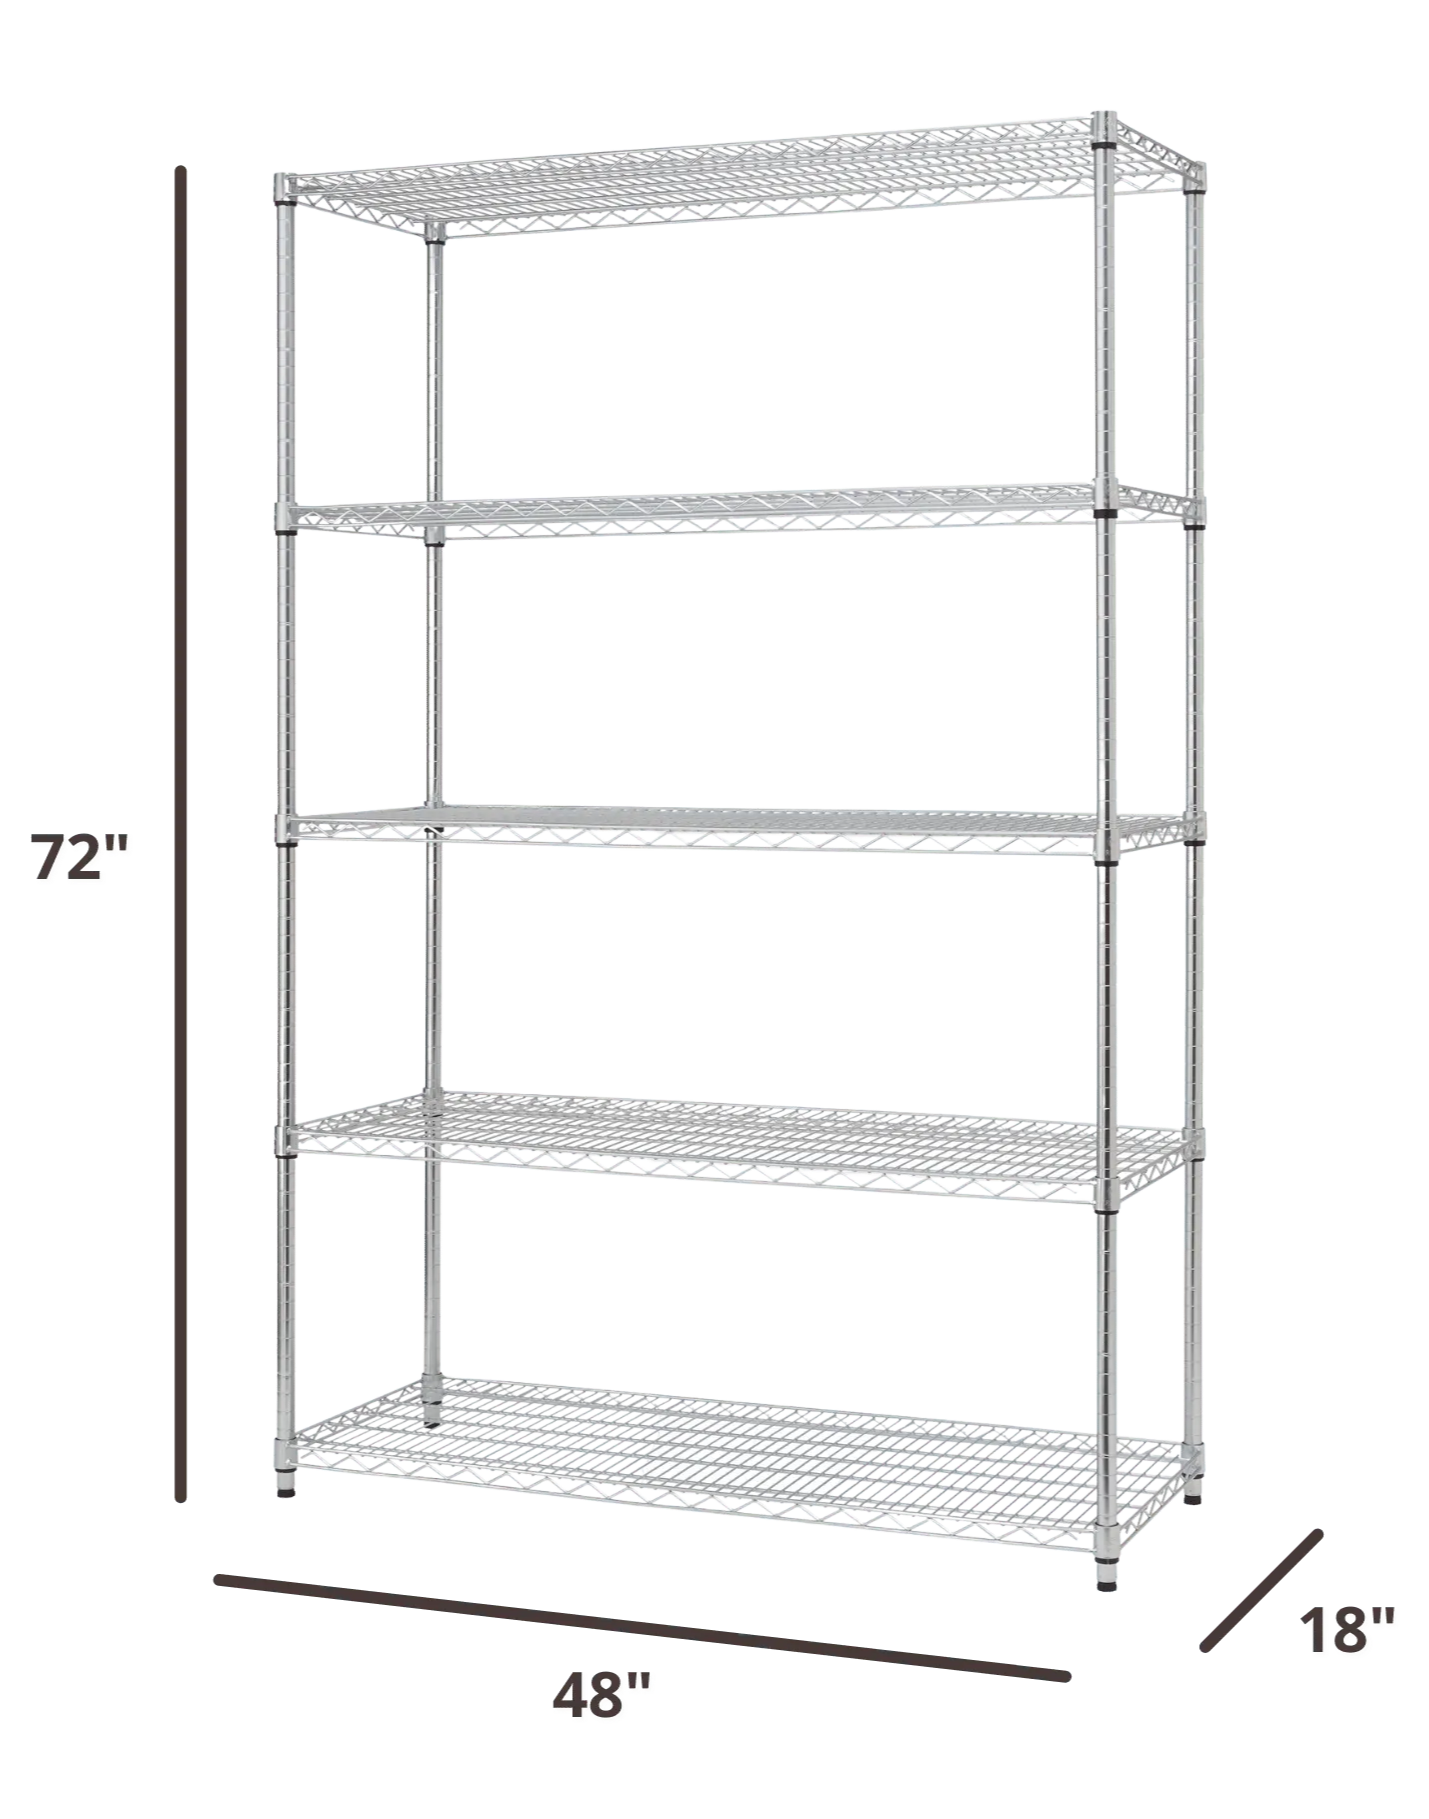 72 inches tall by 48 inches wire shelving rack